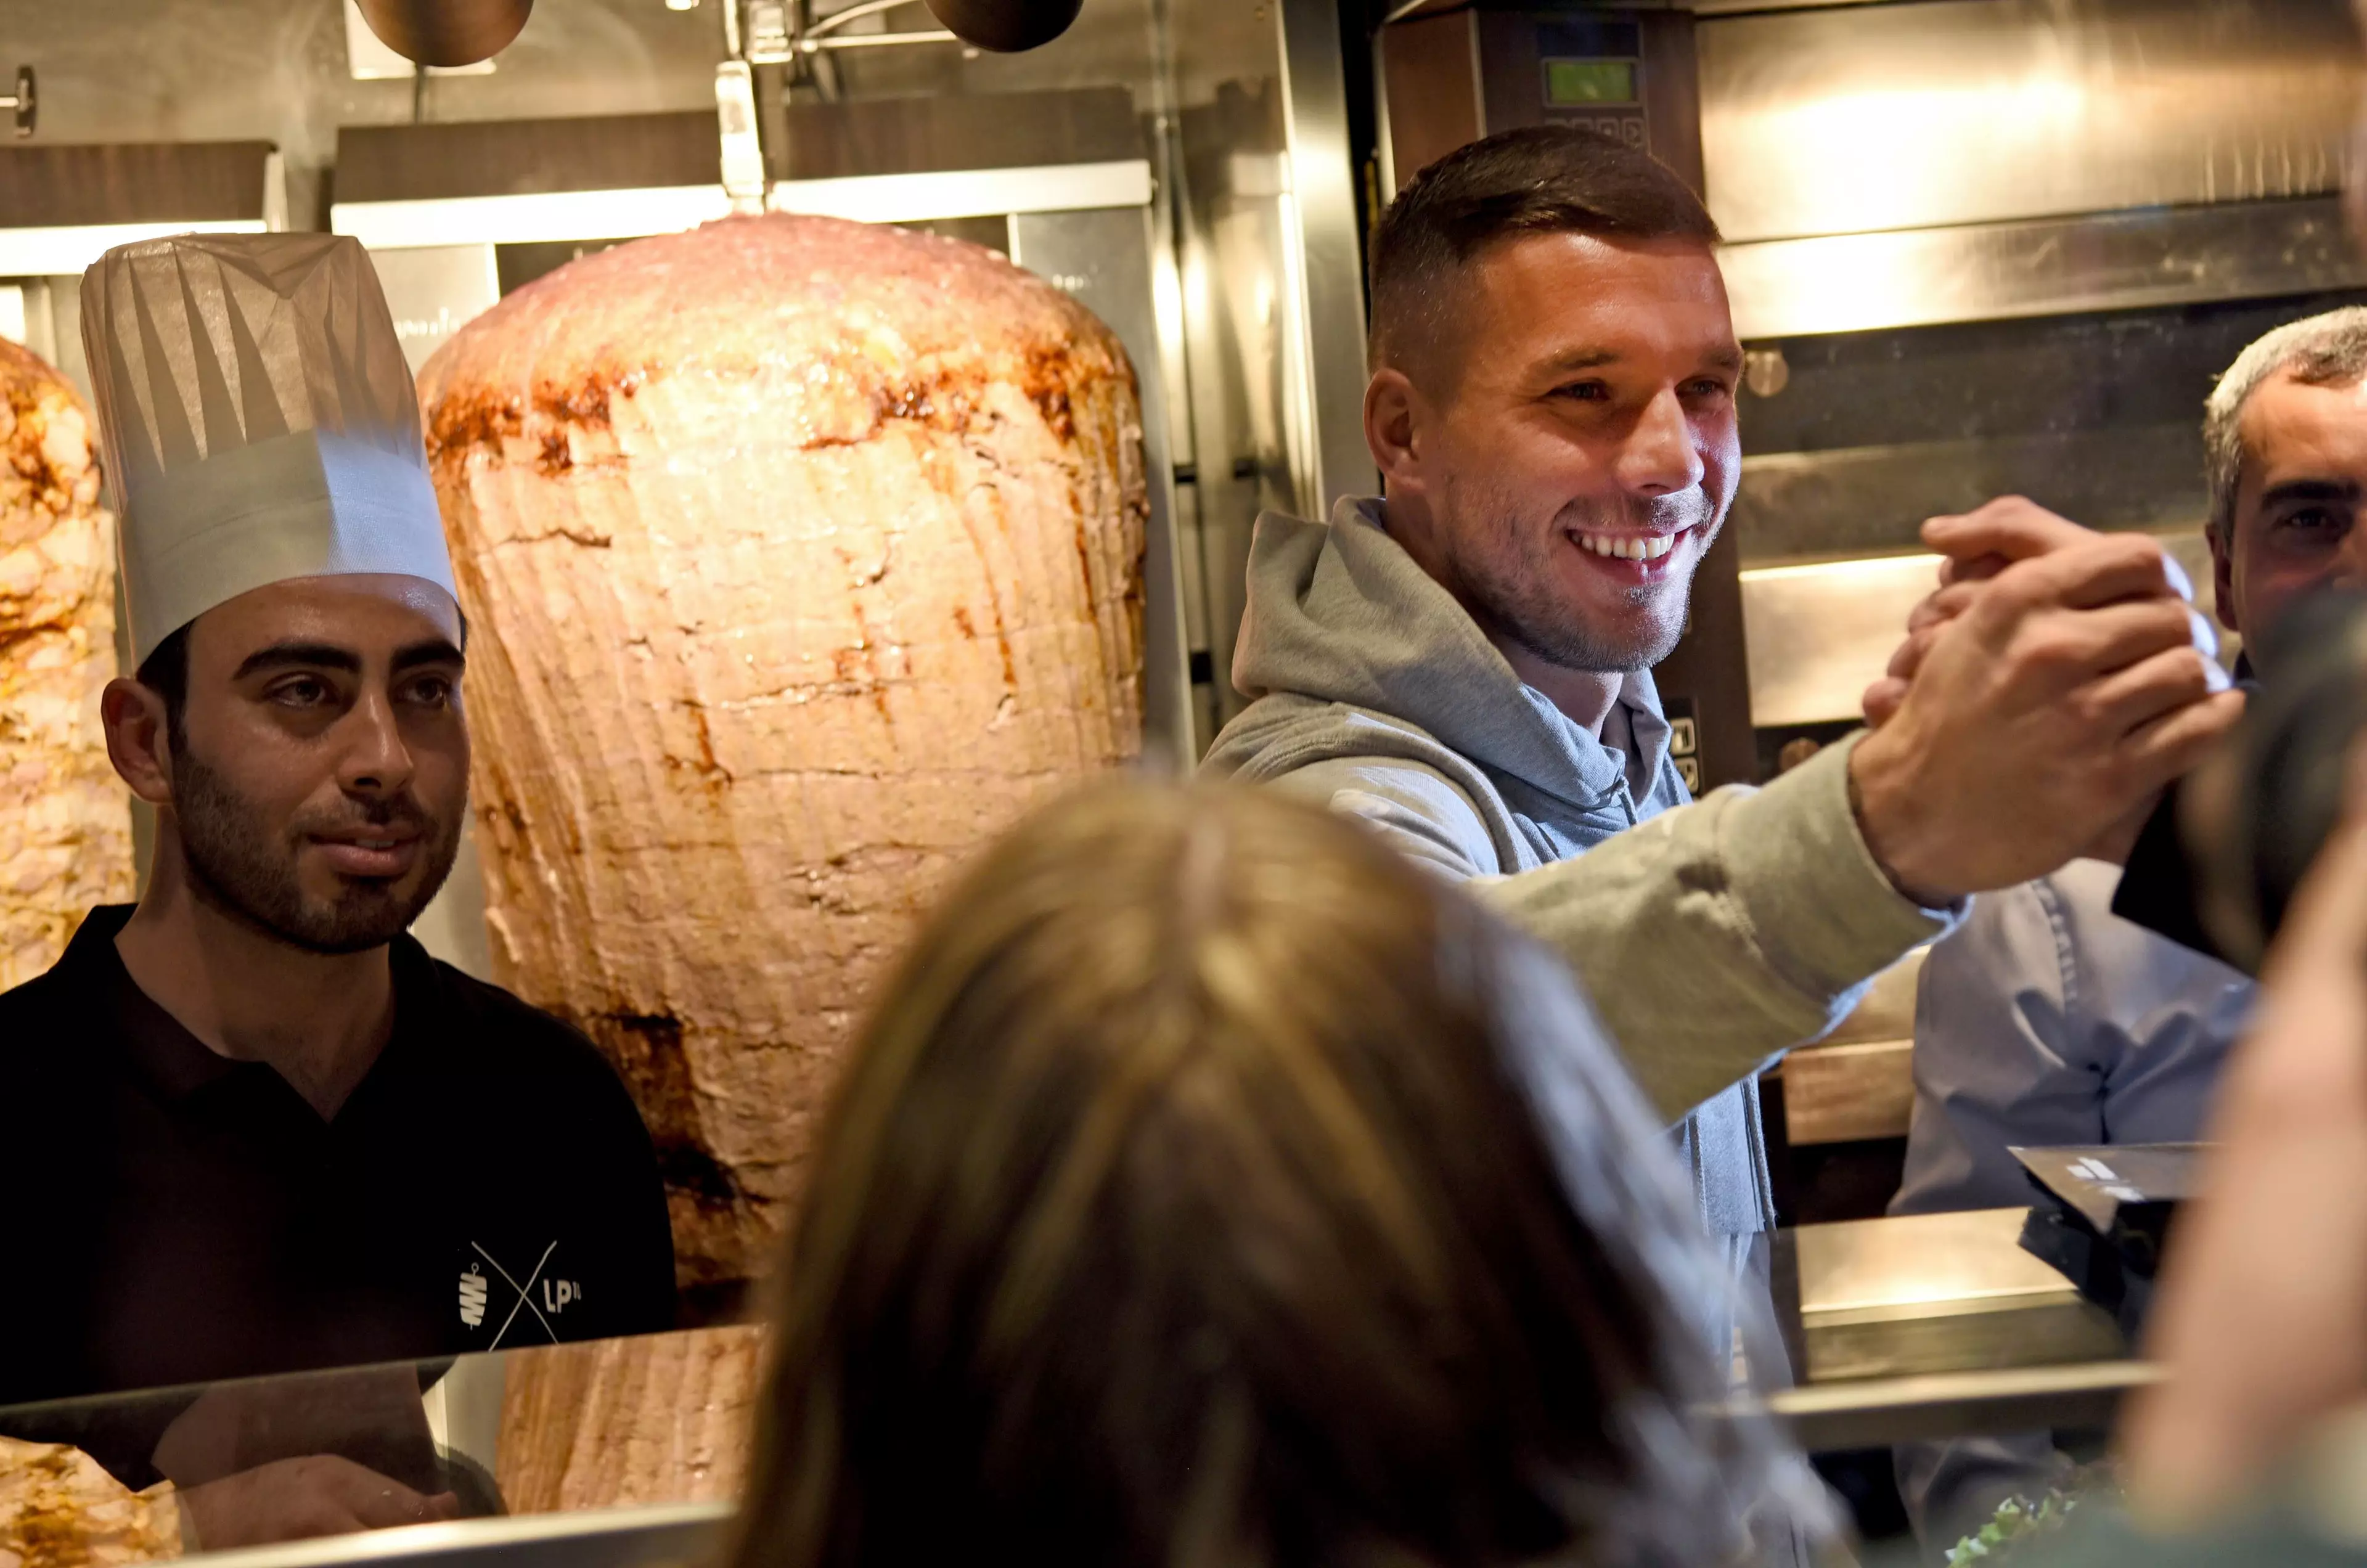 Podolski serves the people what they want. Image: PA Images.